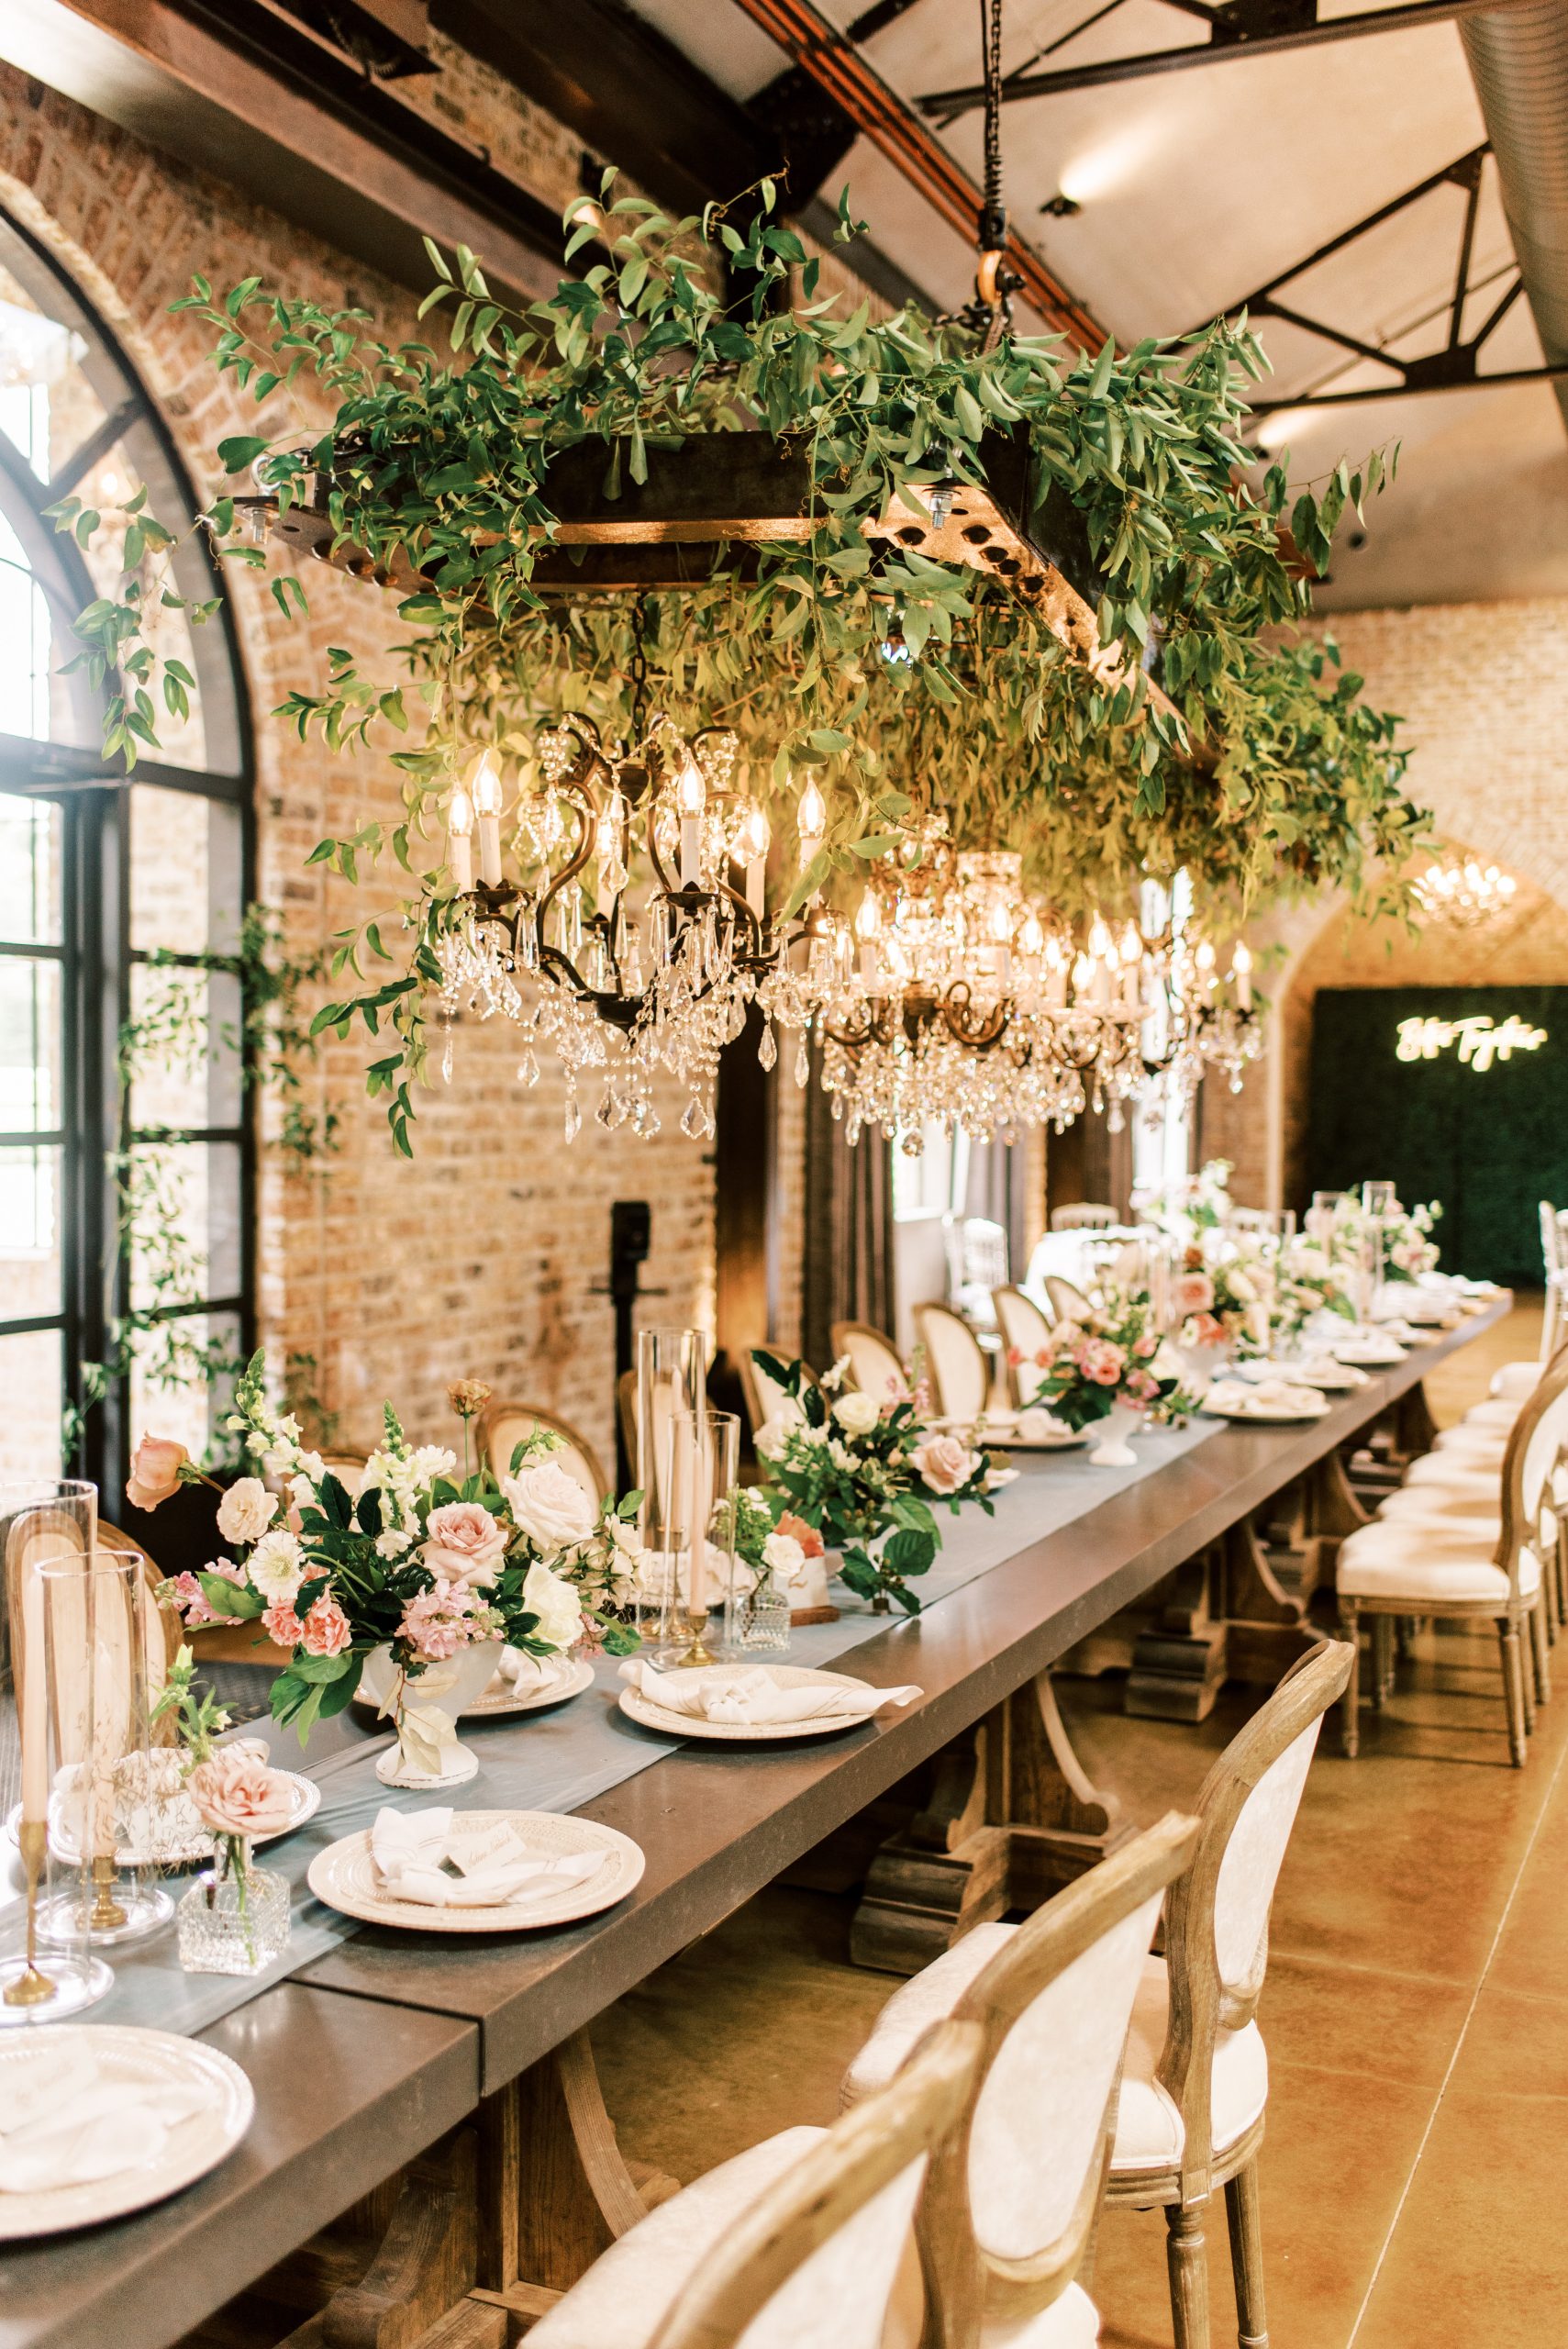 Style School | Incorporating the Venue Style into Your Wedding Design